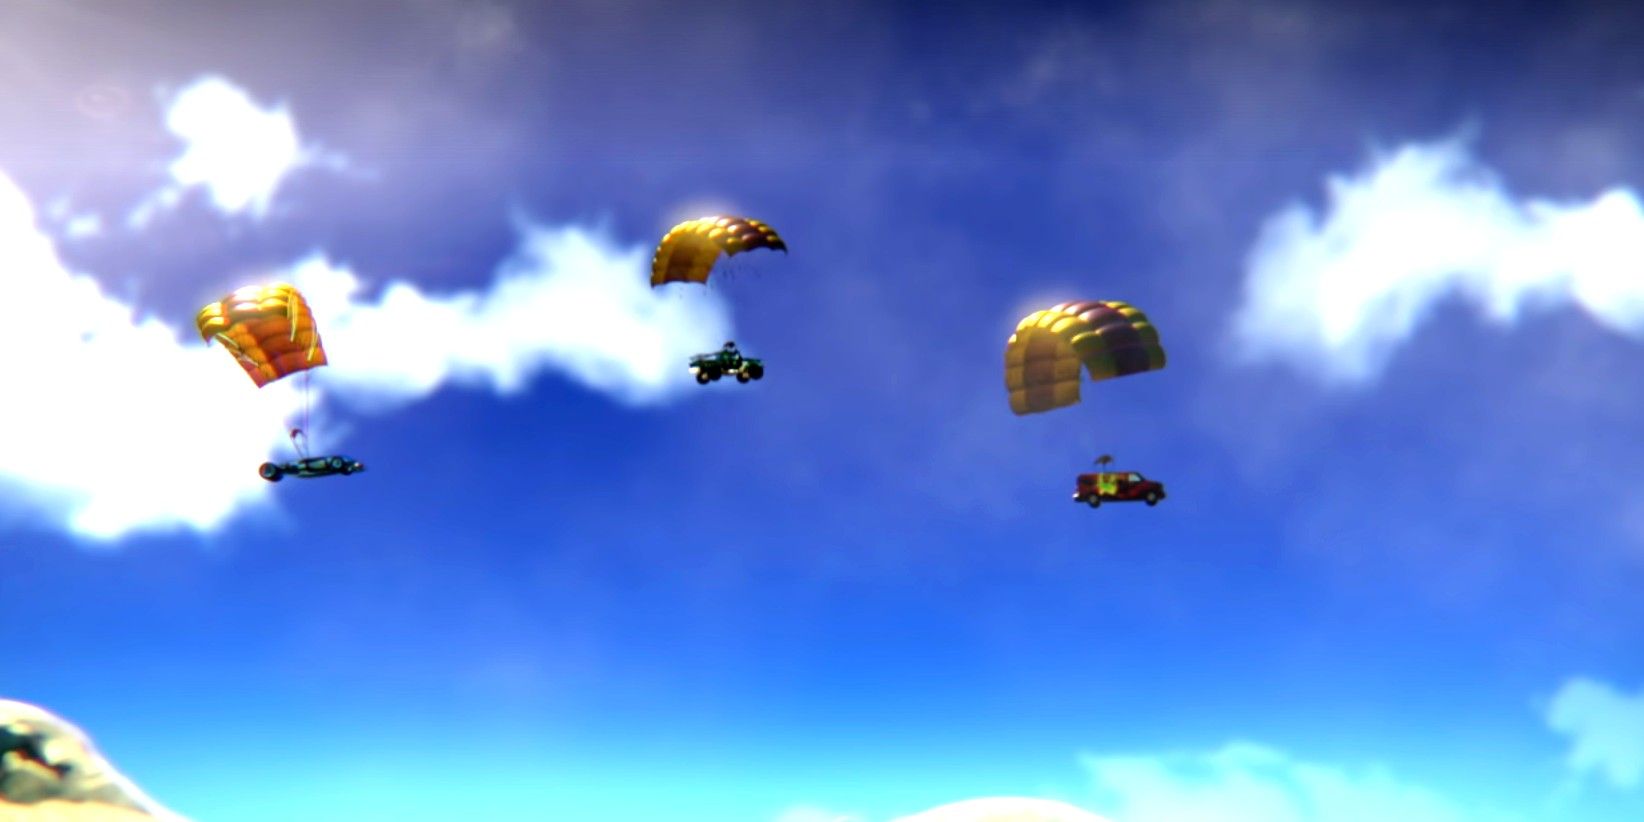 Cars sky diving with parachutes